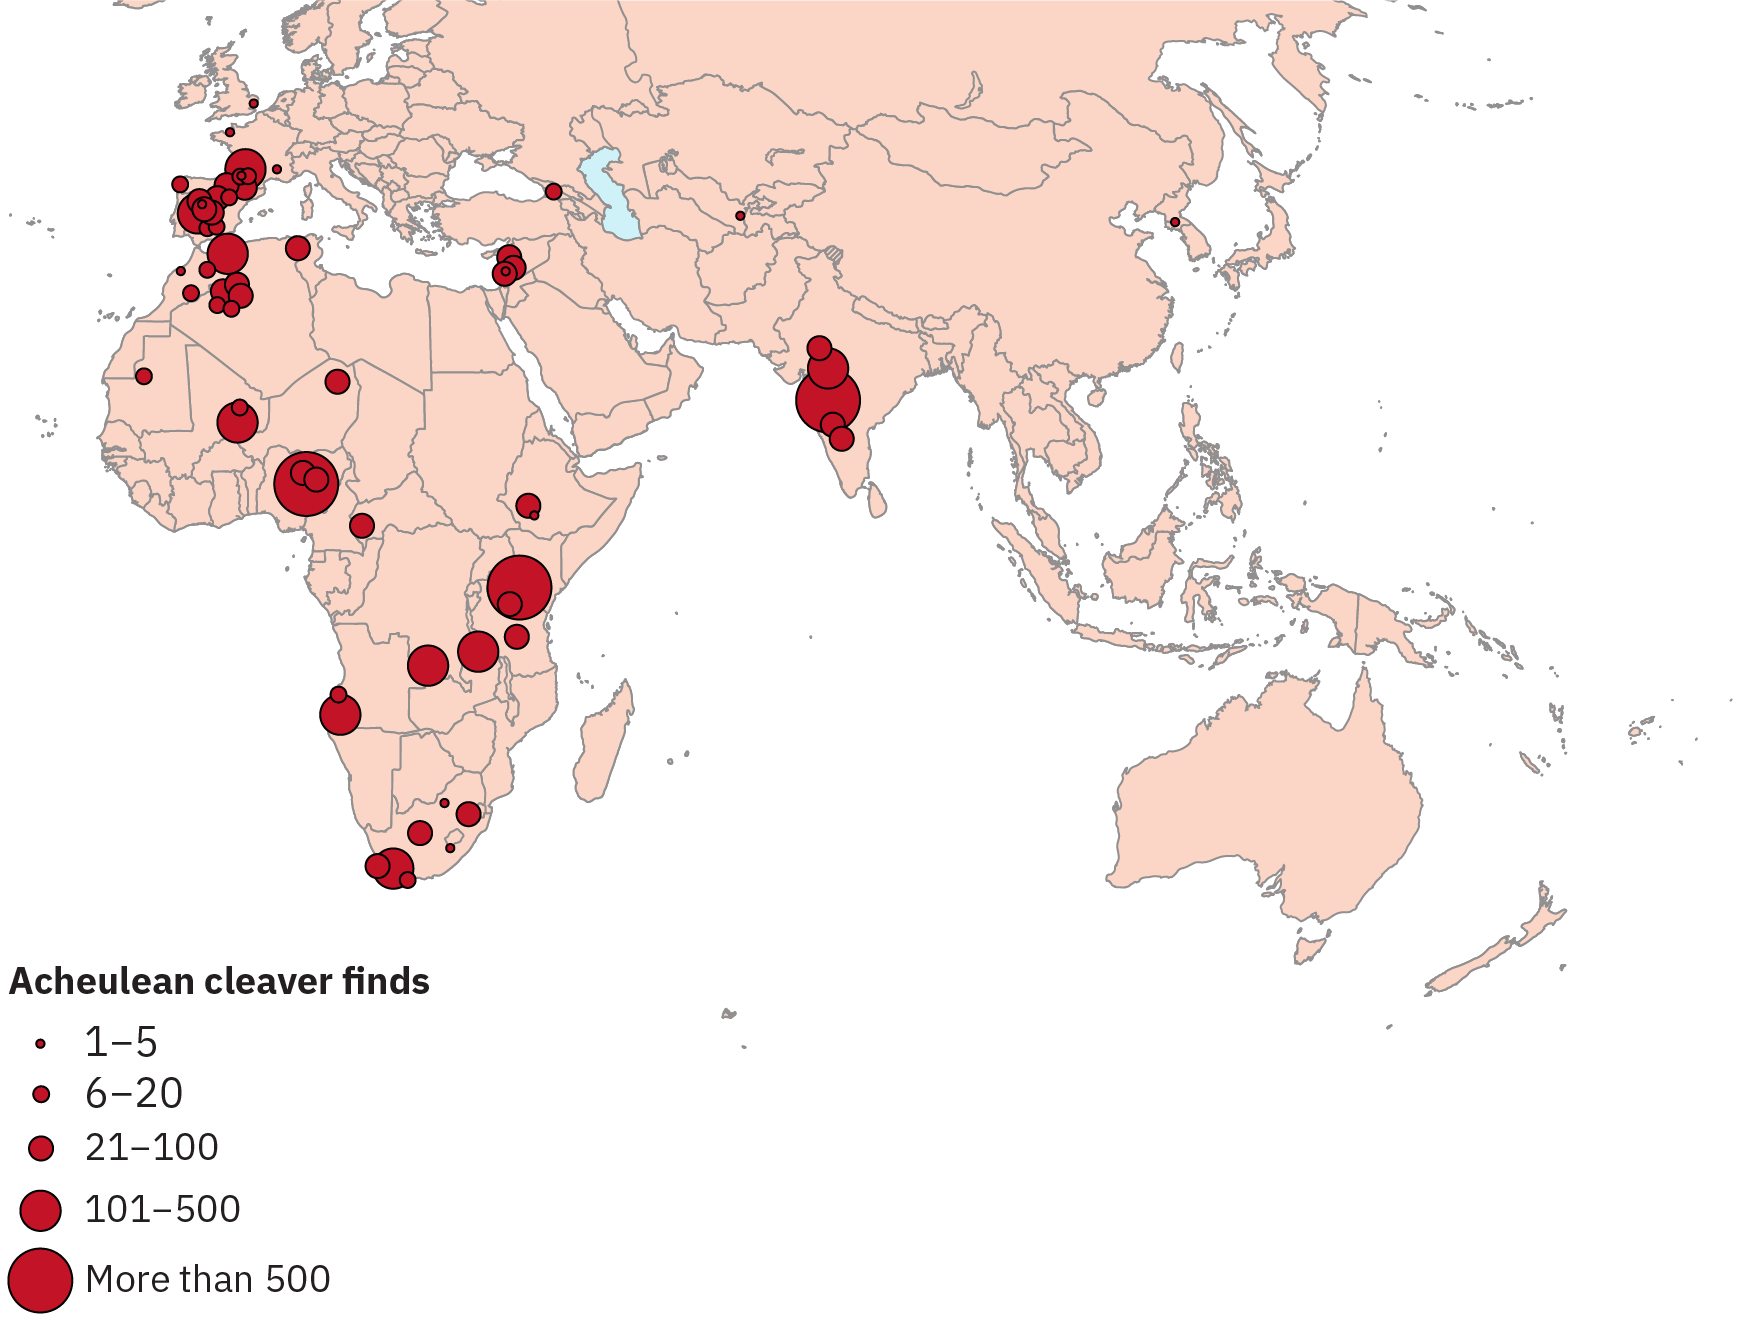 Marks indicating the number of Acheulean cleaver finds imposed on a map of Europe, Asia, and Africa. There are clusters of finds in Spain, India, and certain areas of Africa.